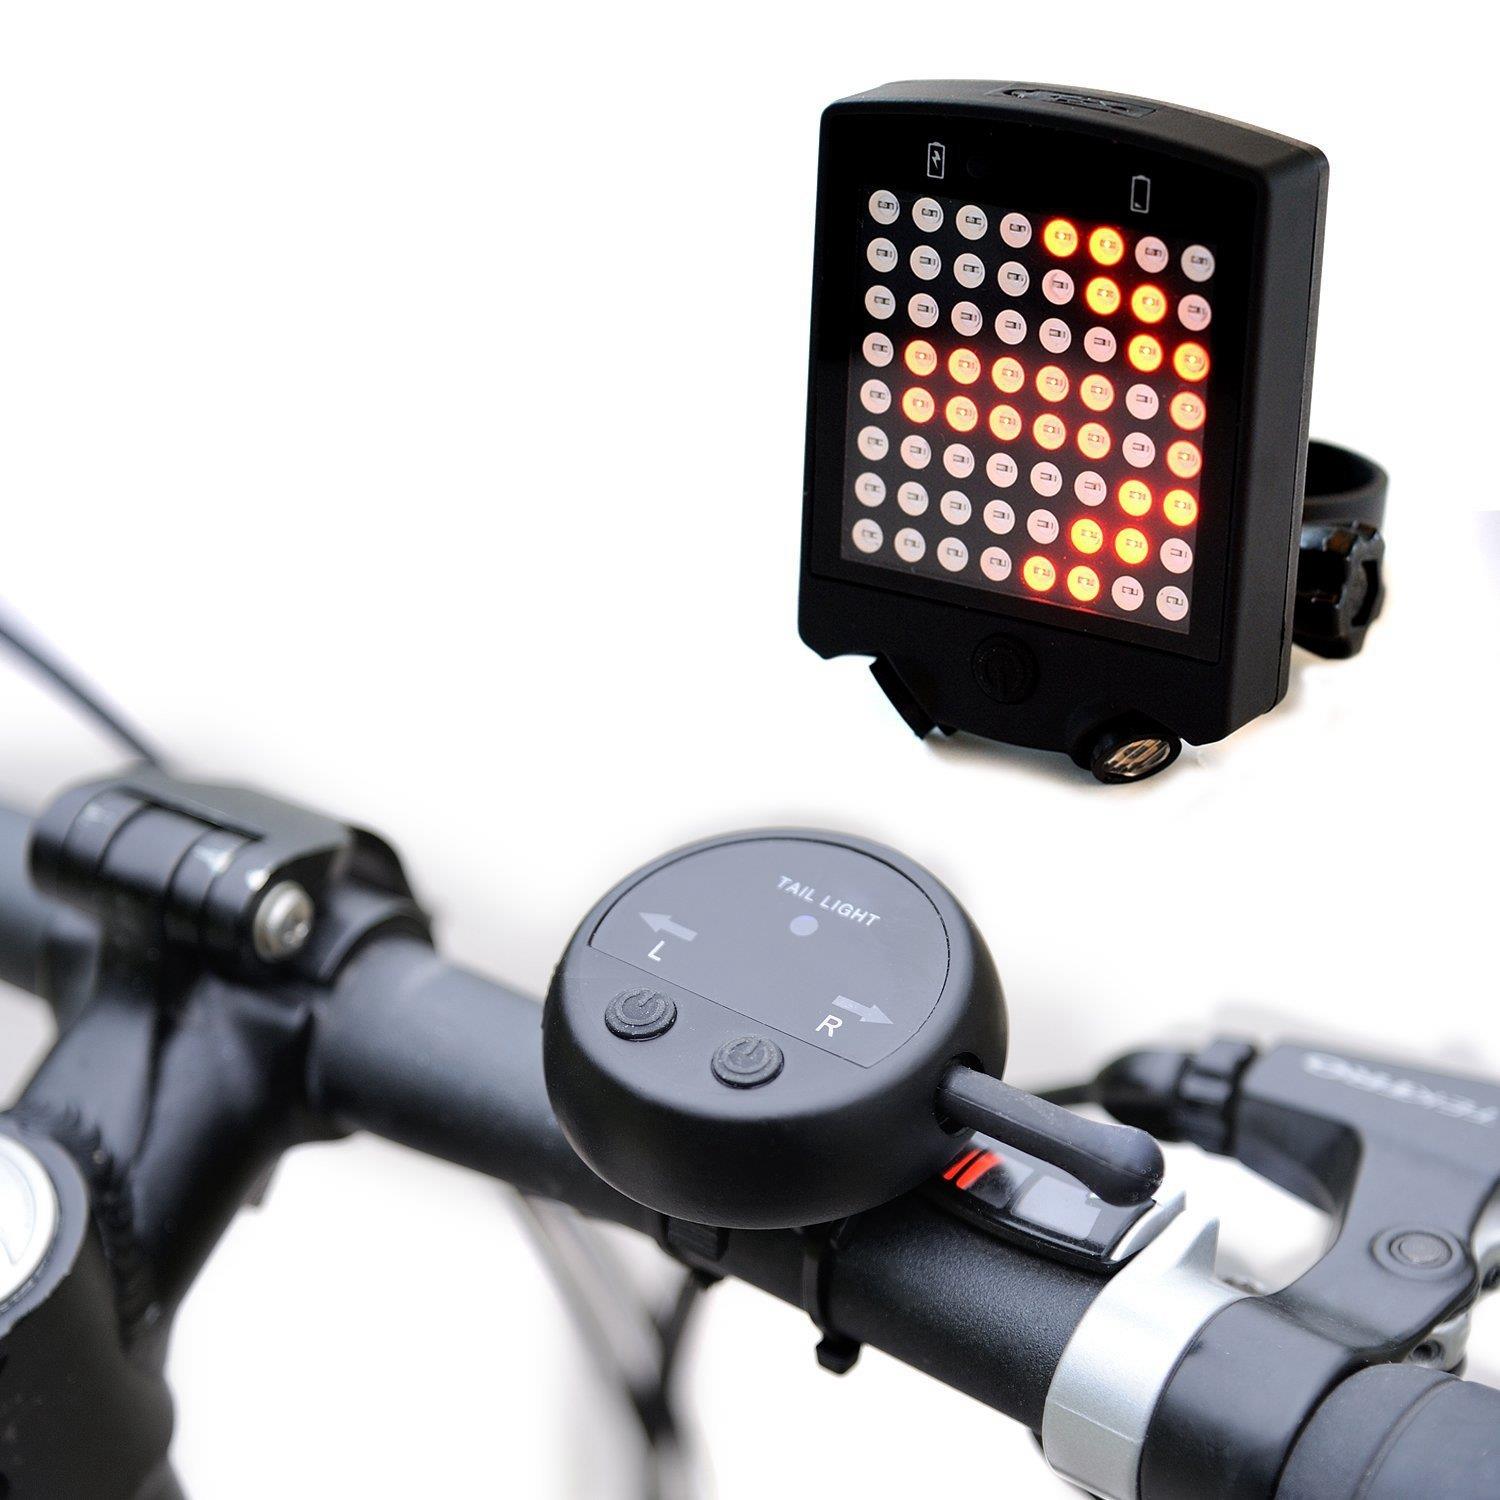 

64 LED Wireless Remote Laser Bicycle Rear Tail Light Bike Turn Signals Safety Warning Light